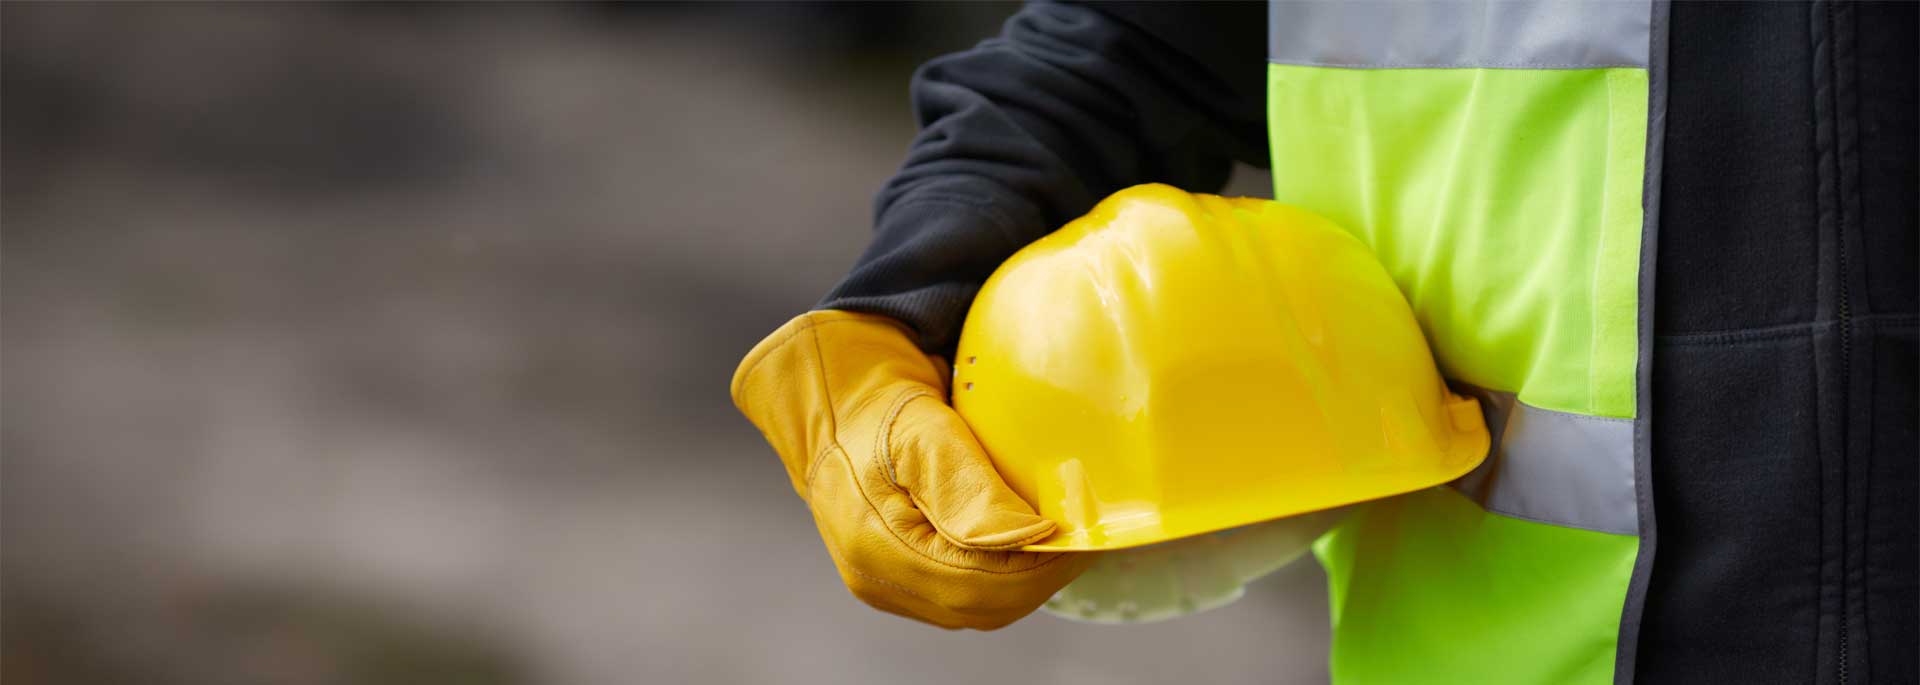 yellow Safety Hardhat and neon yellow Safety Vest and yellow gloves